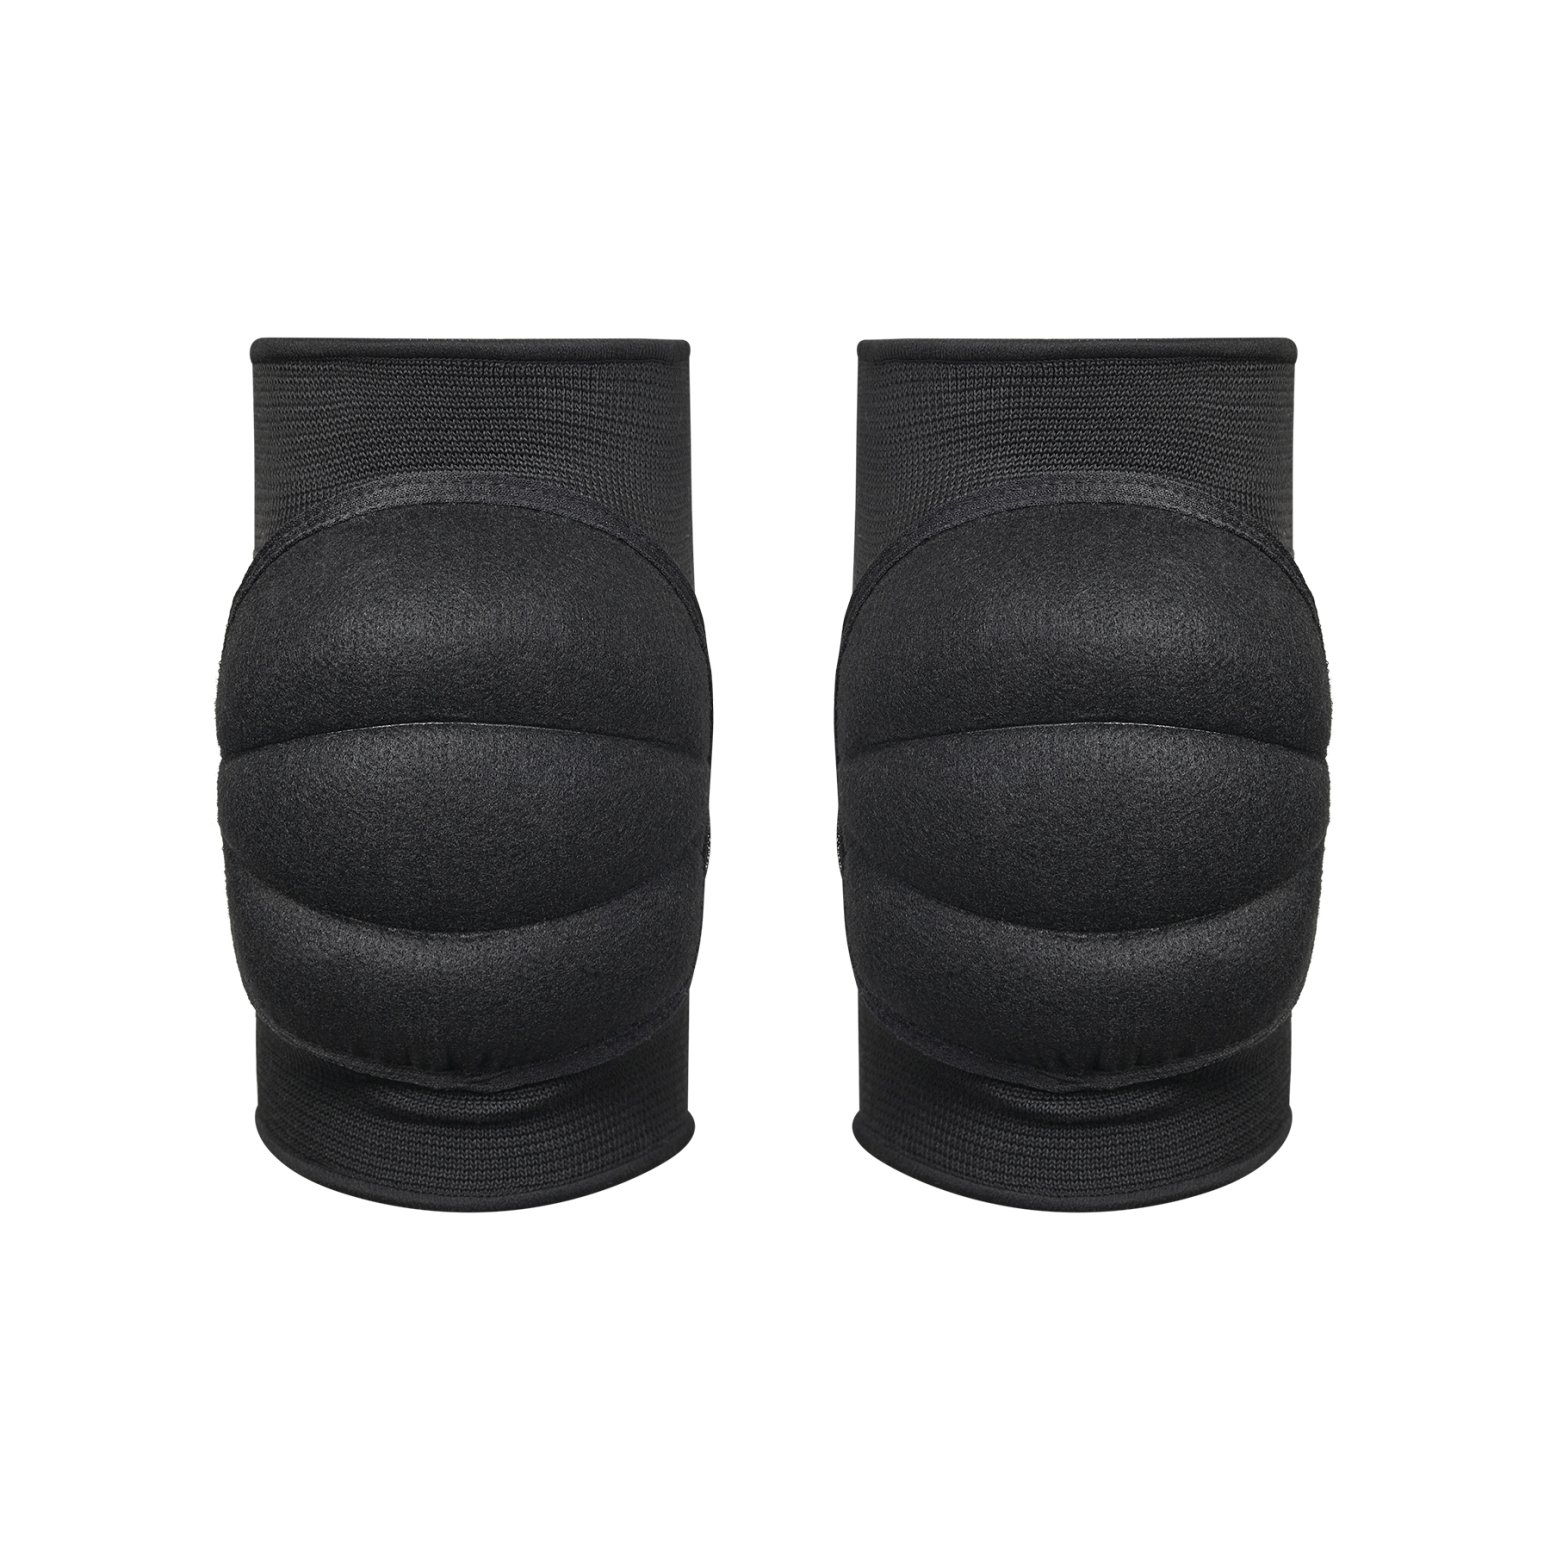 Deluxe Padded MMA Knee Pads - Black - Click Image to Close